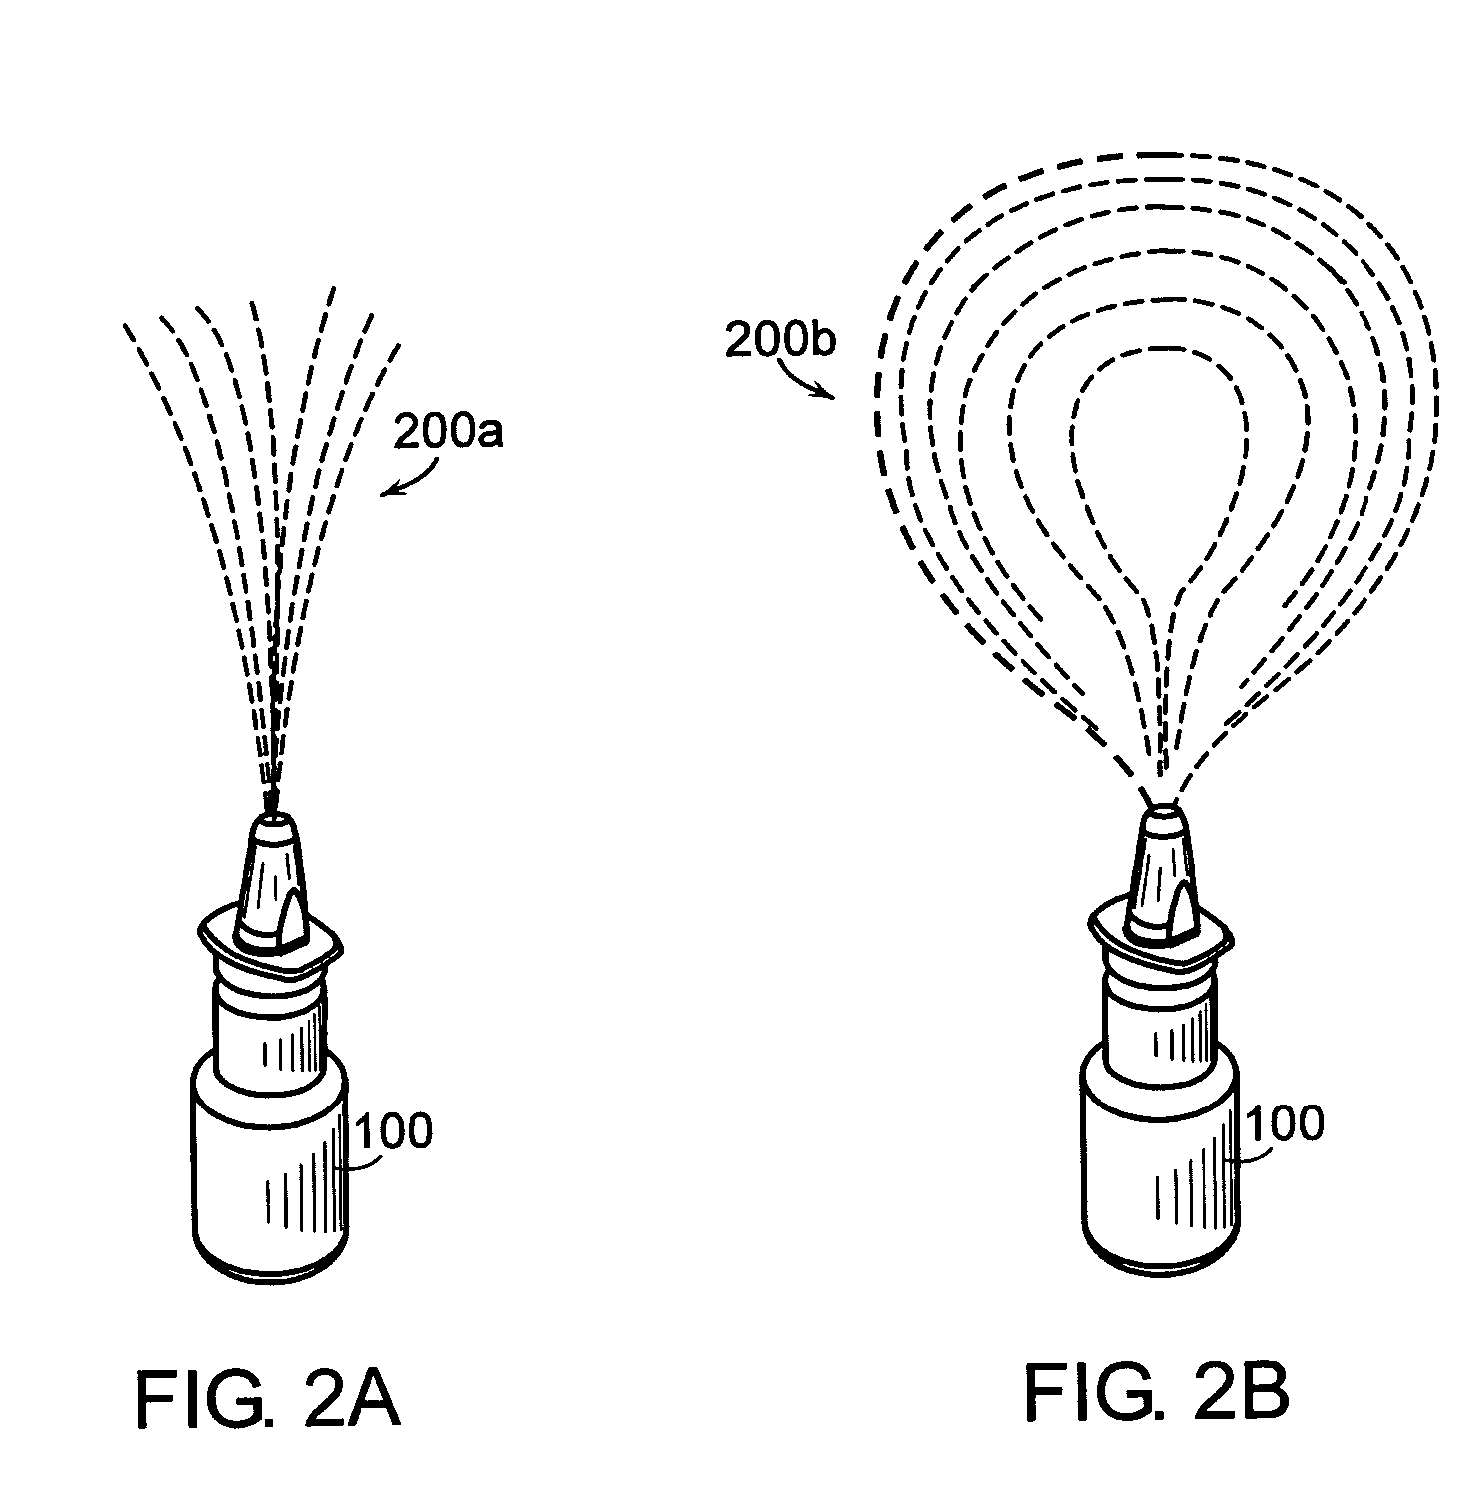 Method of servicing companies associated with a spray device operating under guidelines of a regulatory body